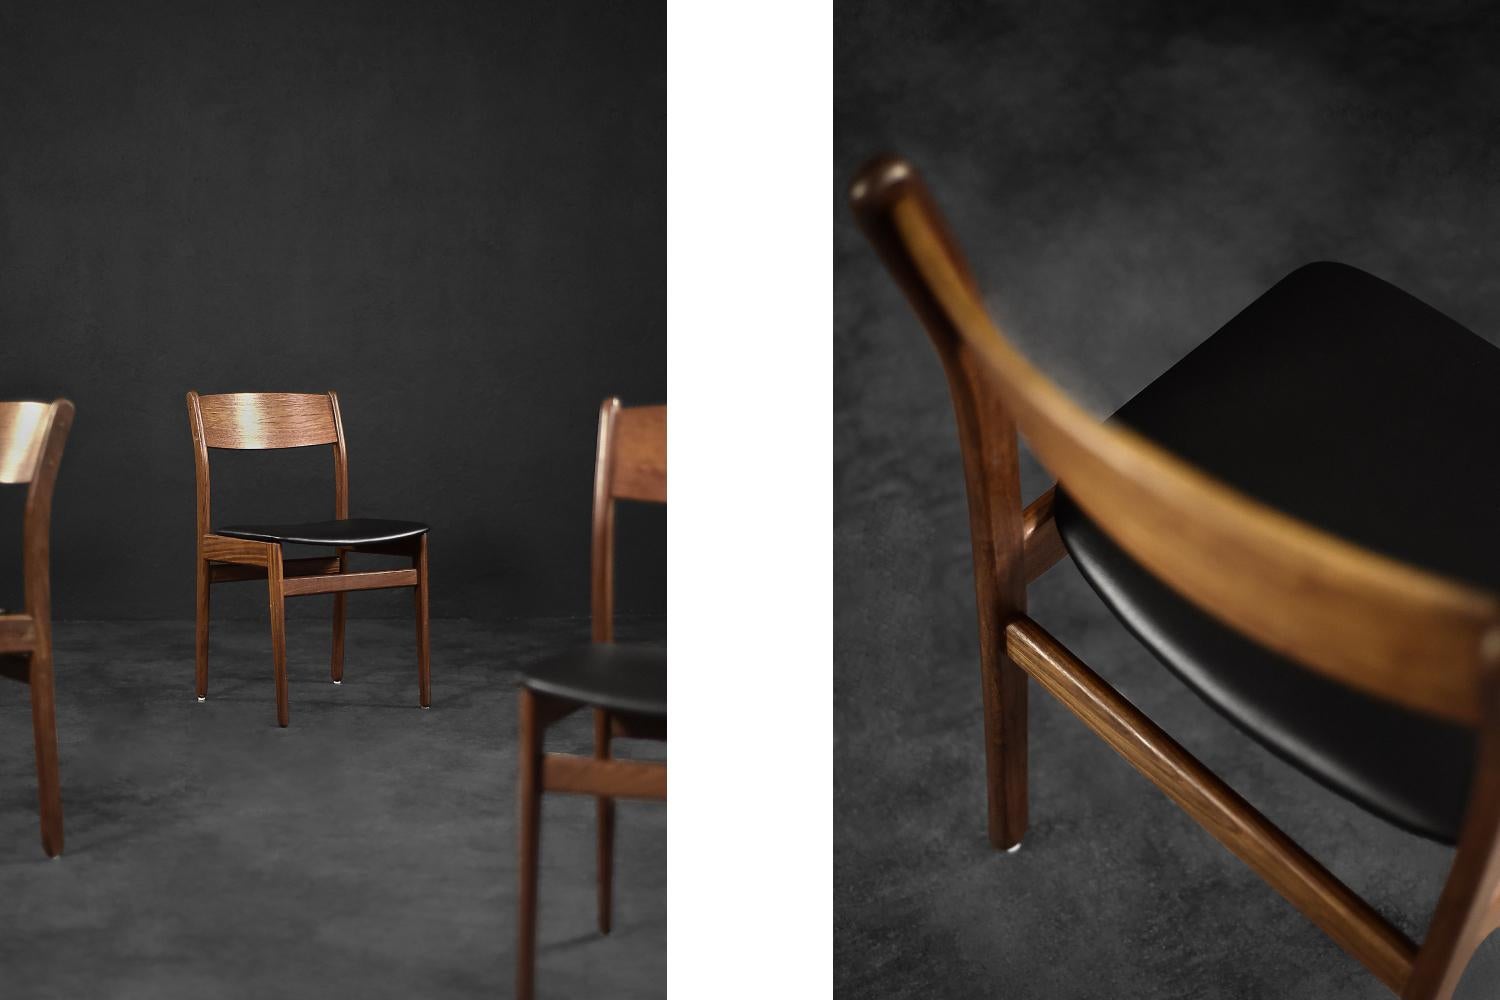 This set of four dining chairs was made in Denmark during the 1960s. The chairs are made of teak wood in a warm shade of brown. The seats have been reupholstered with high-quality black vinyl. The chairs have a minimalist Danish design. The simple